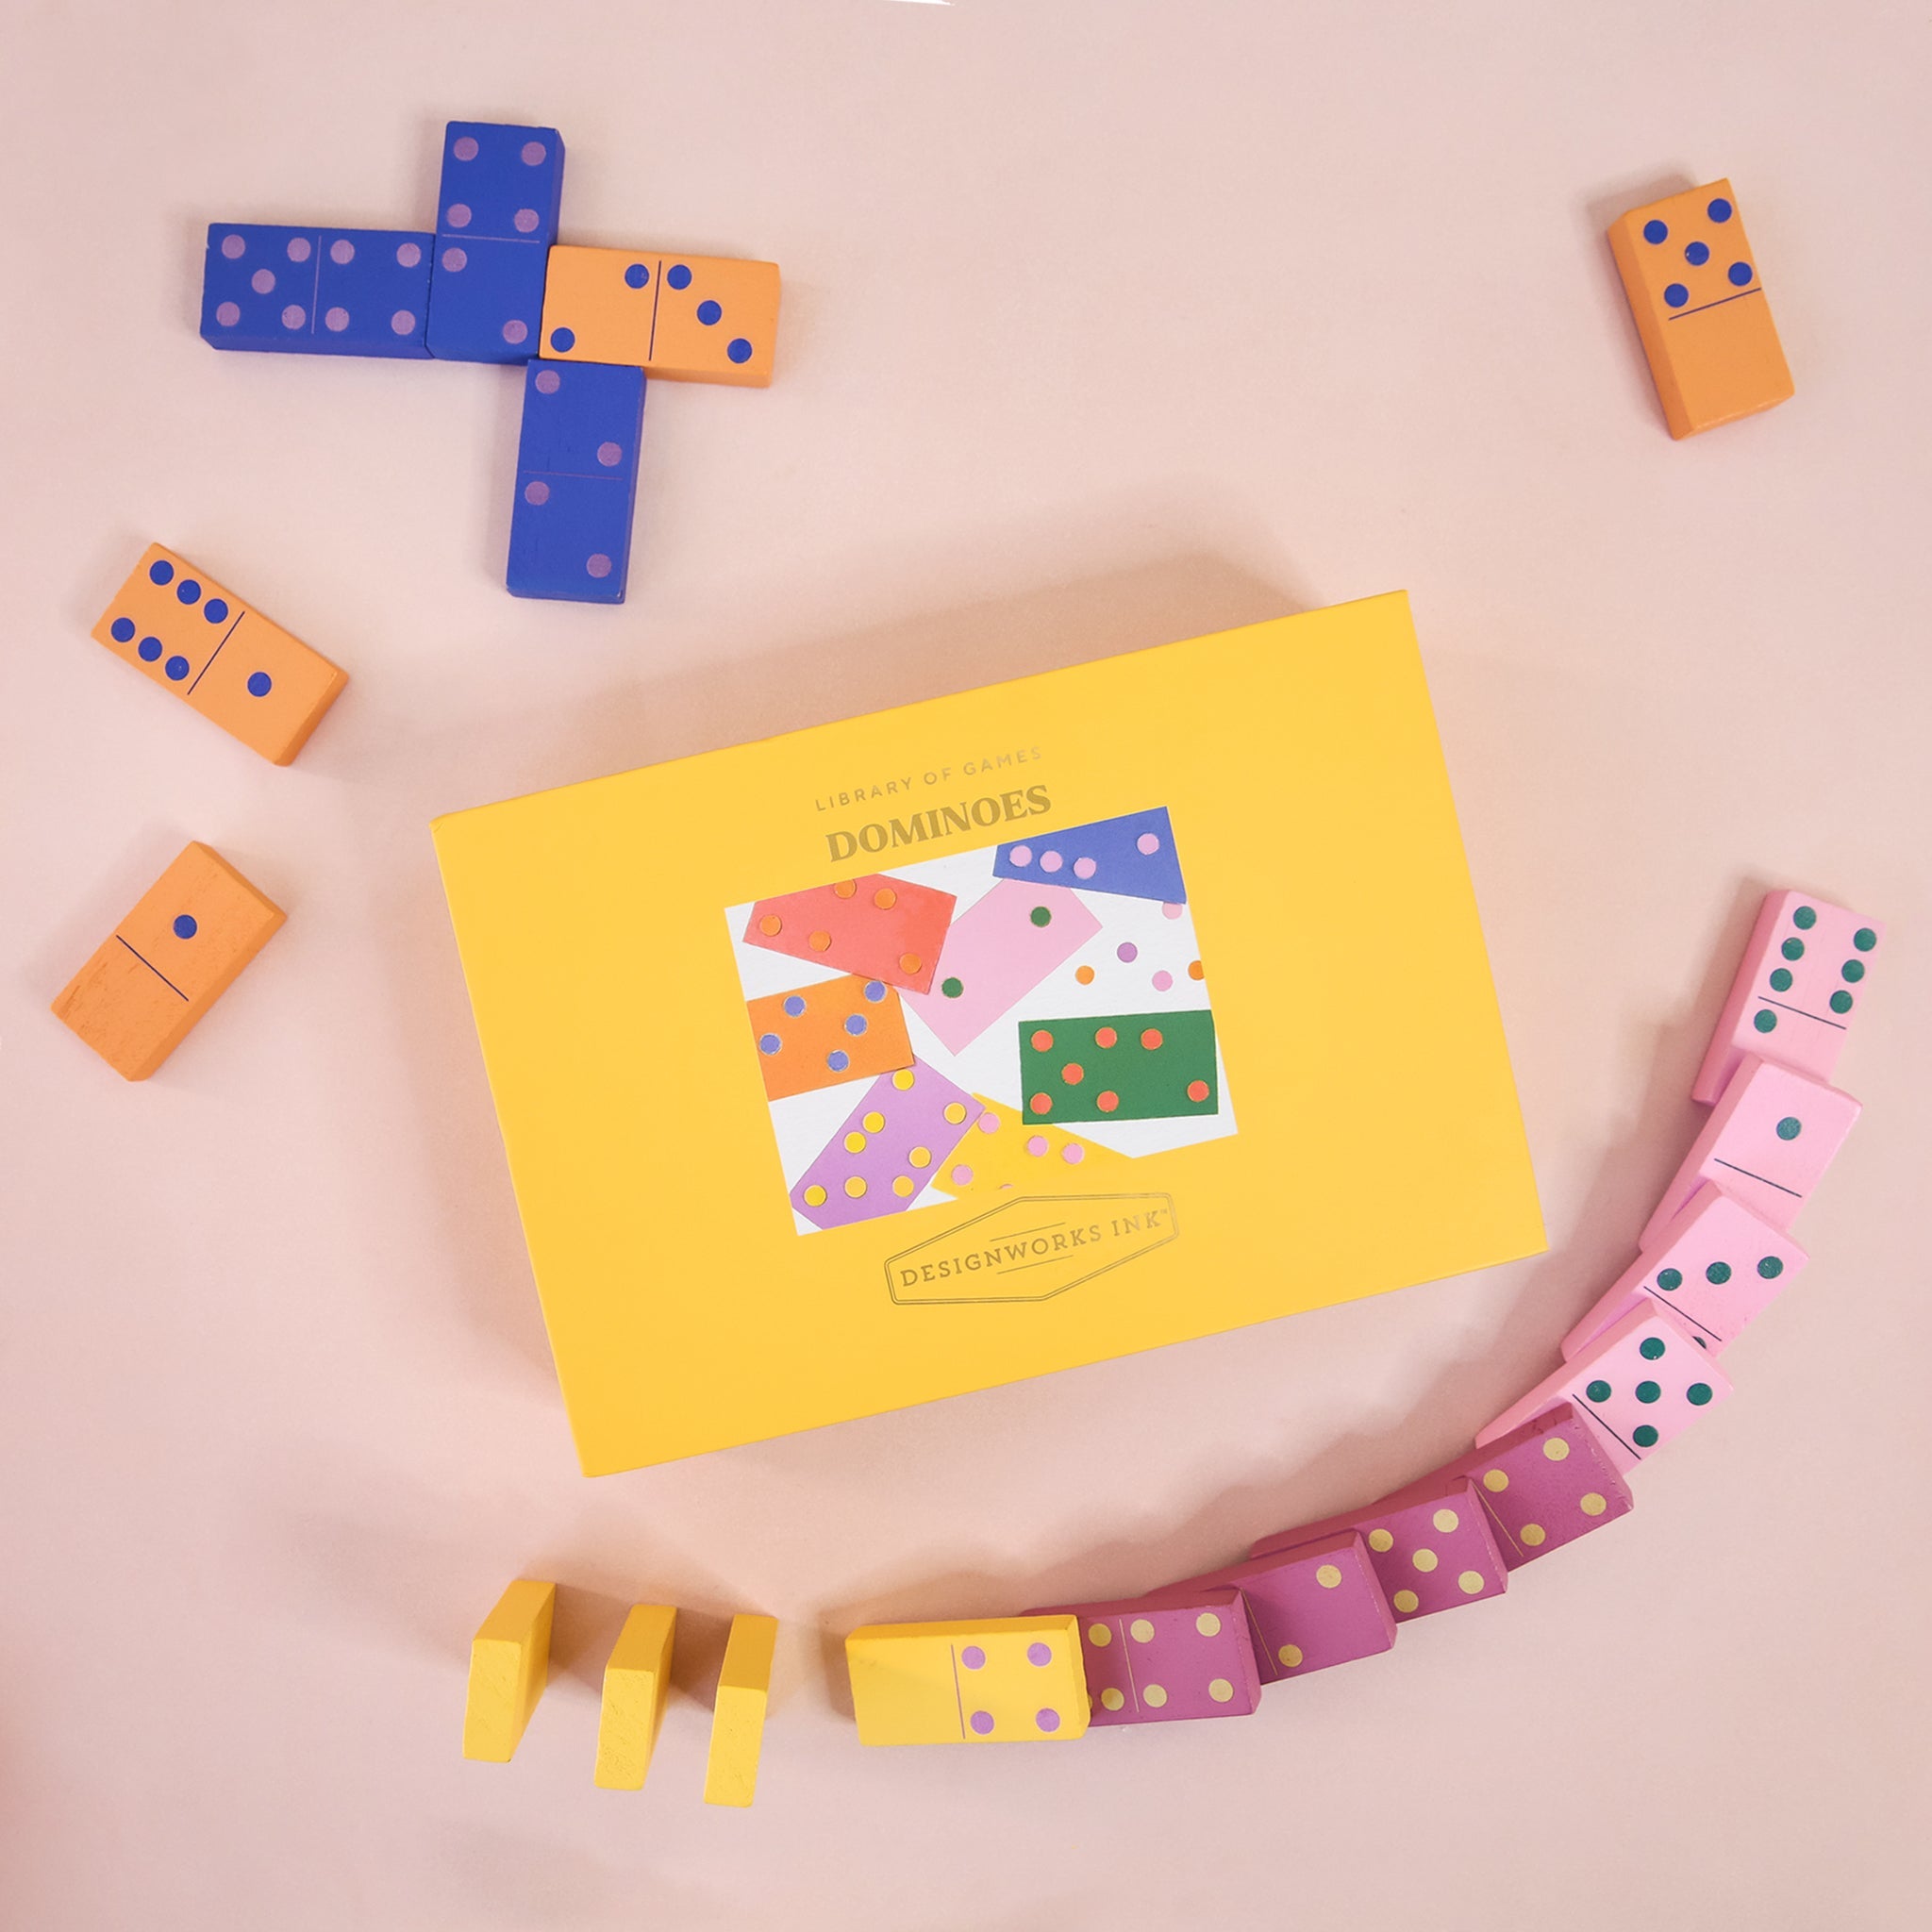 a colorful dominos set with a yellow box sits on a pink ground